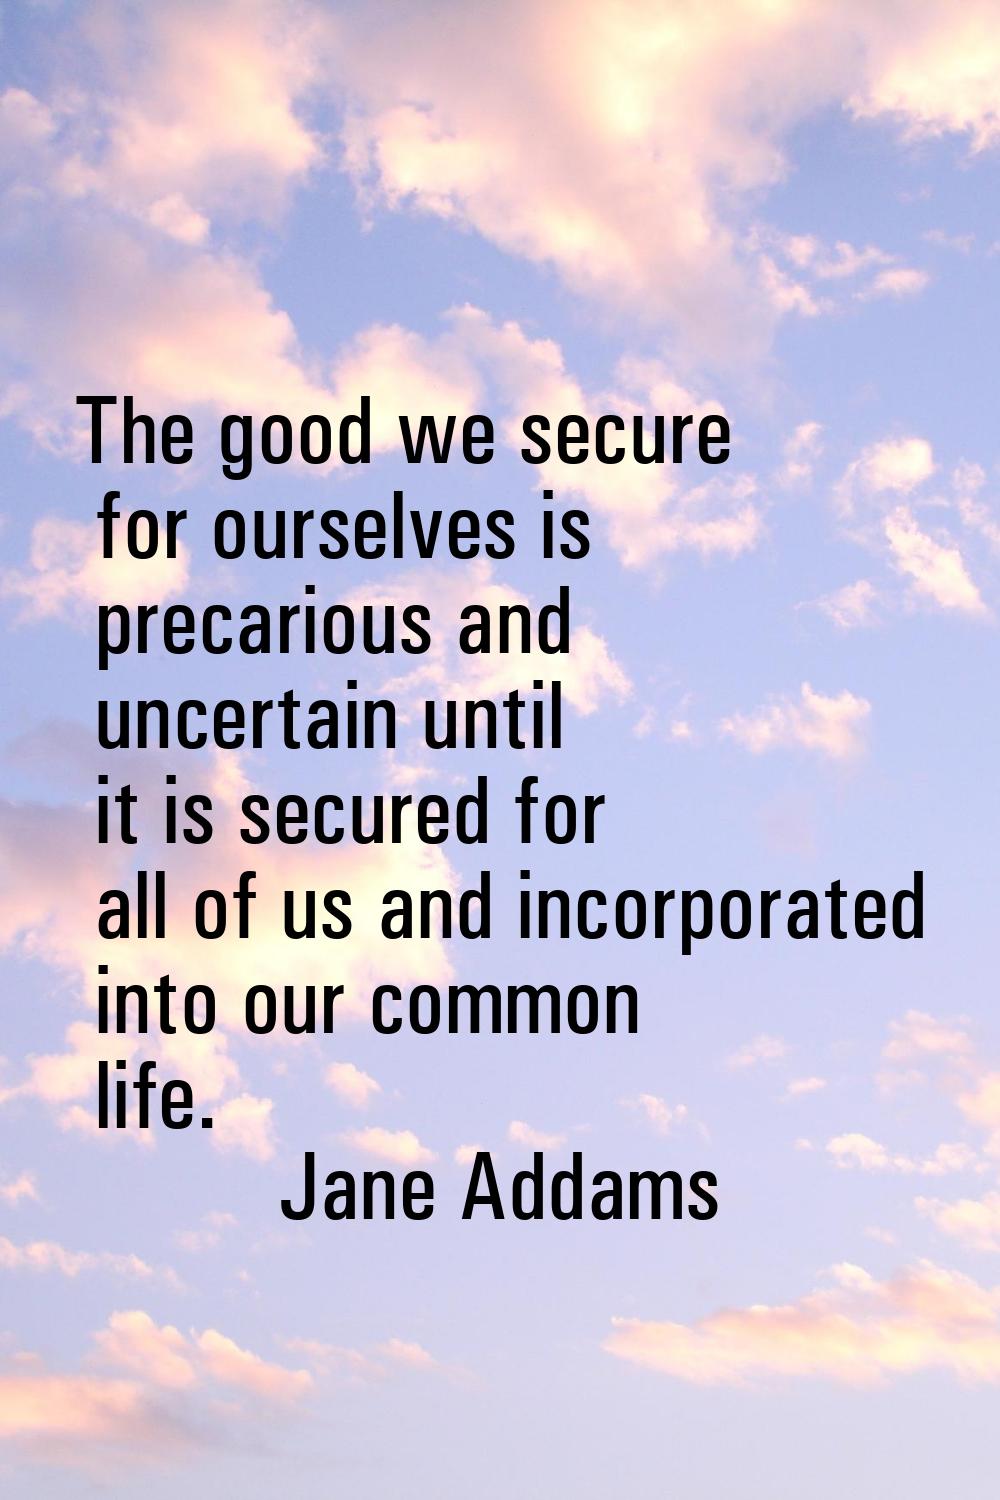 The good we secure for ourselves is precarious and uncertain until it is secured for all of us and 